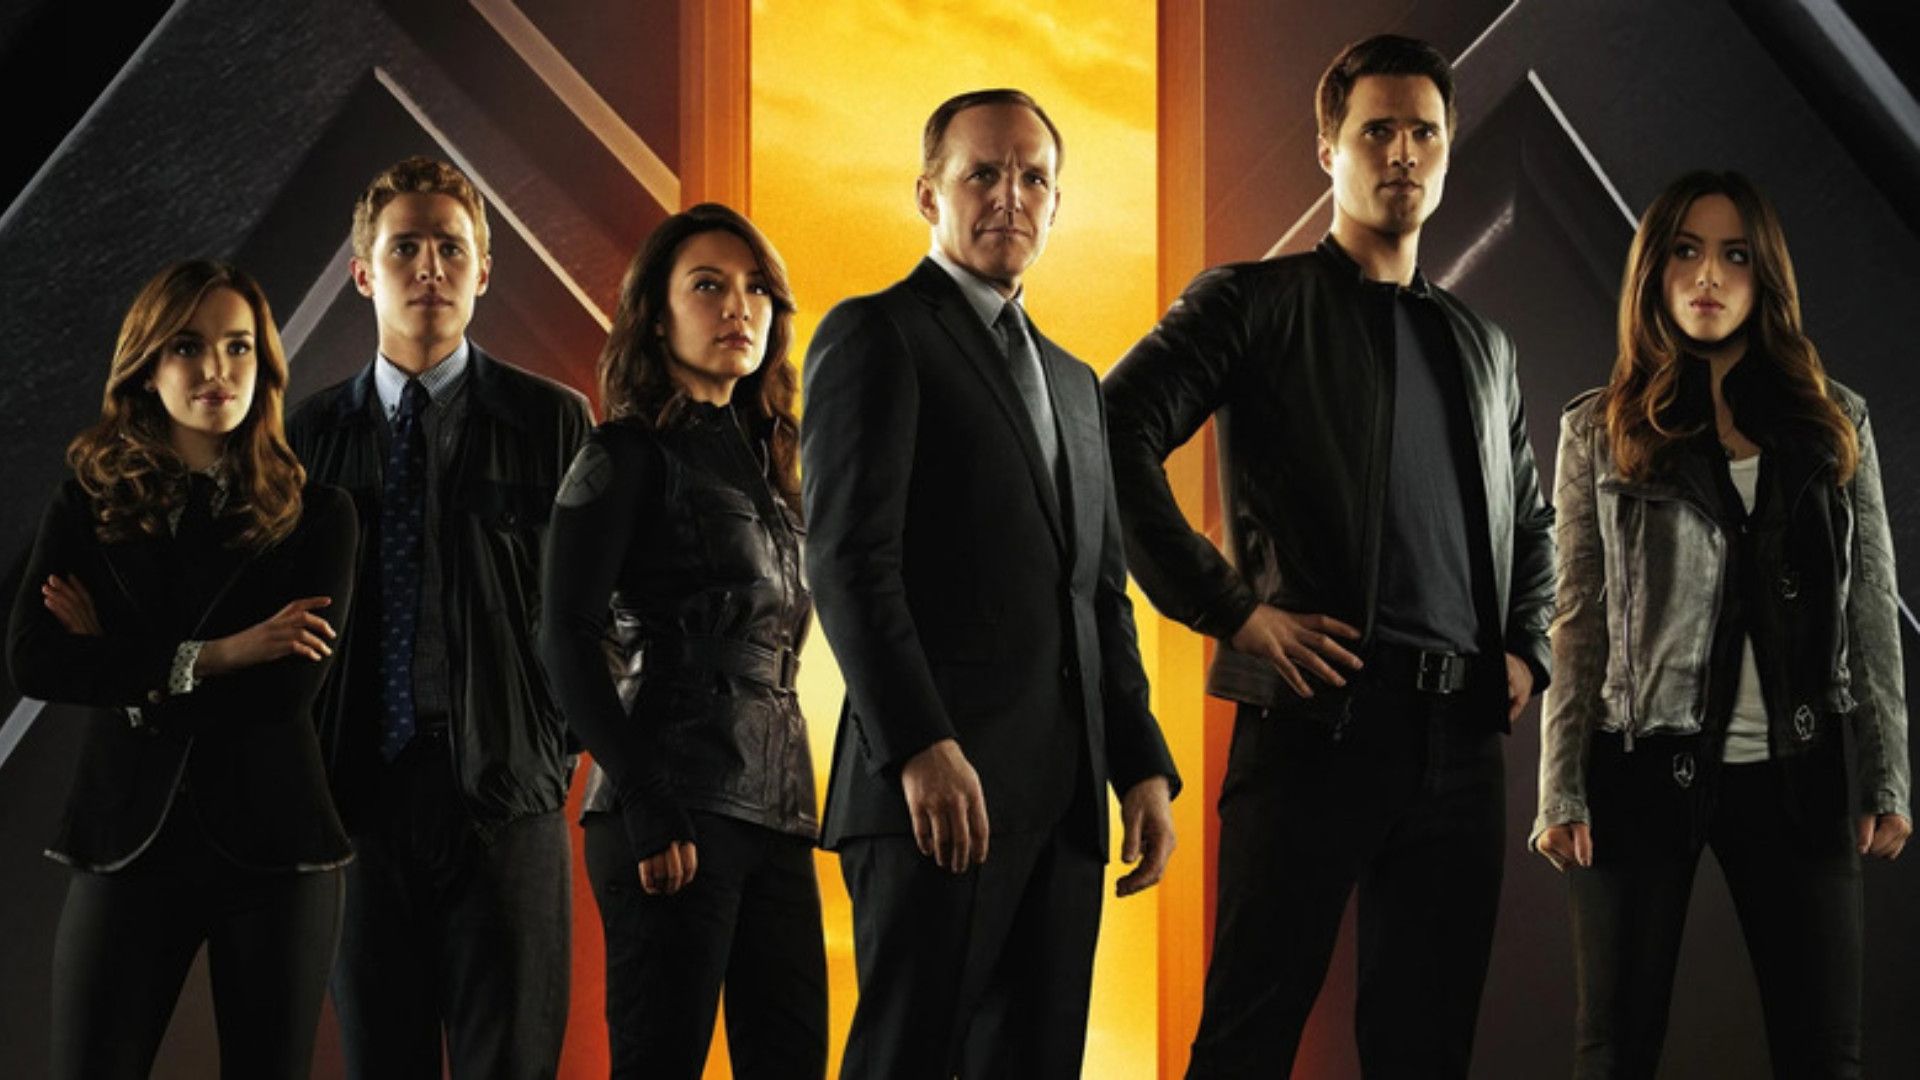 The cast of Agents of S.H.I.E.L.D. stand together